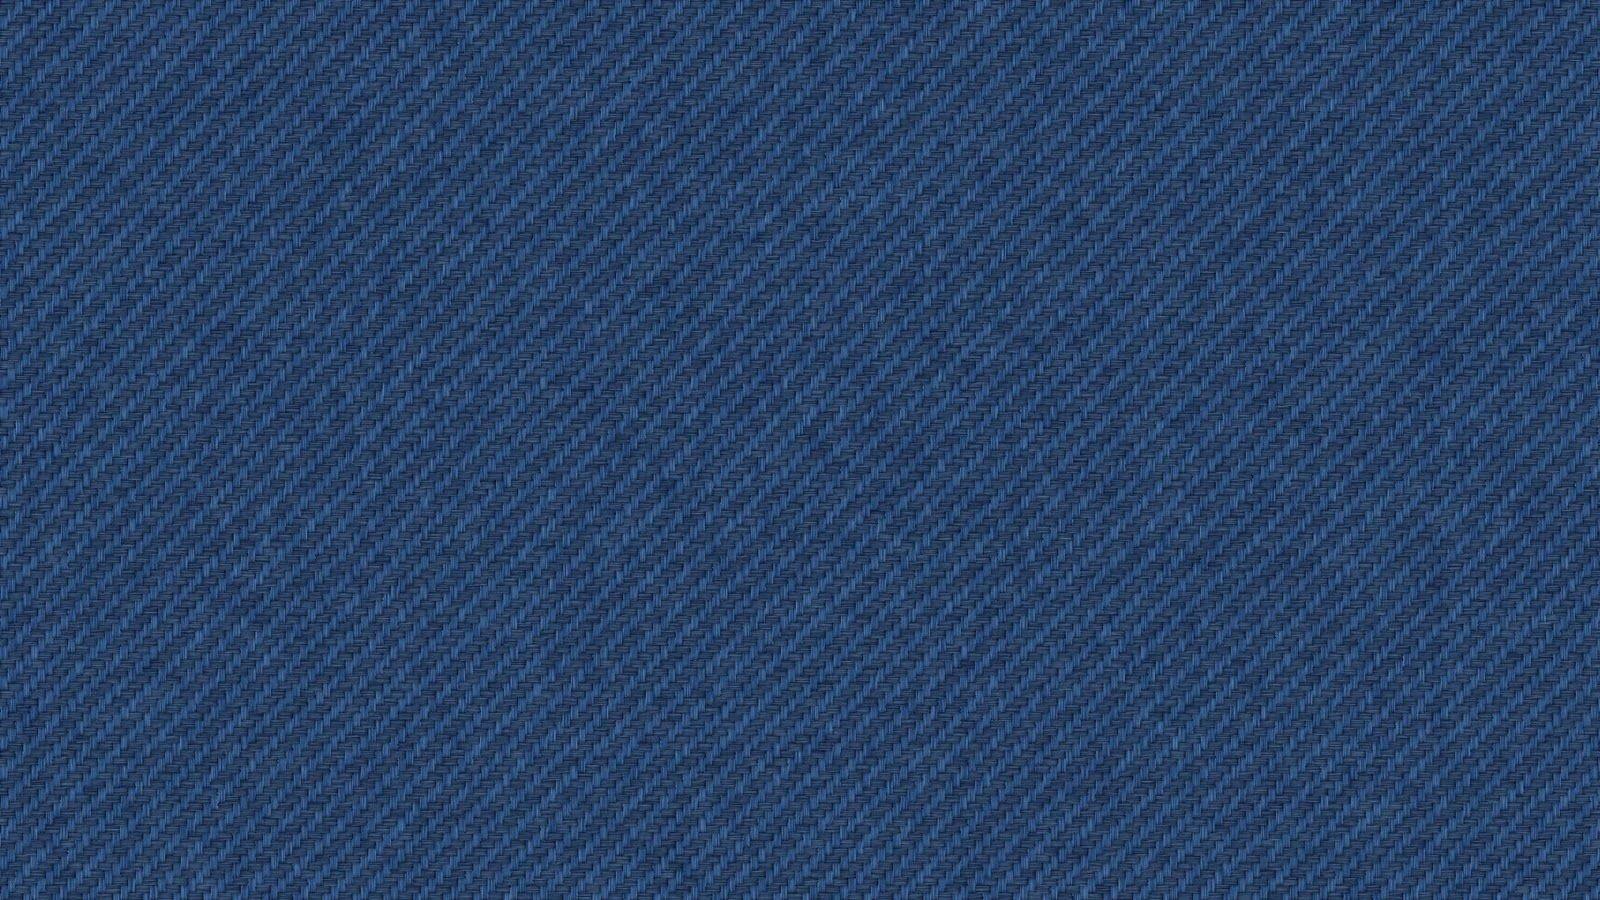 Jeans Wallpaper High Quality